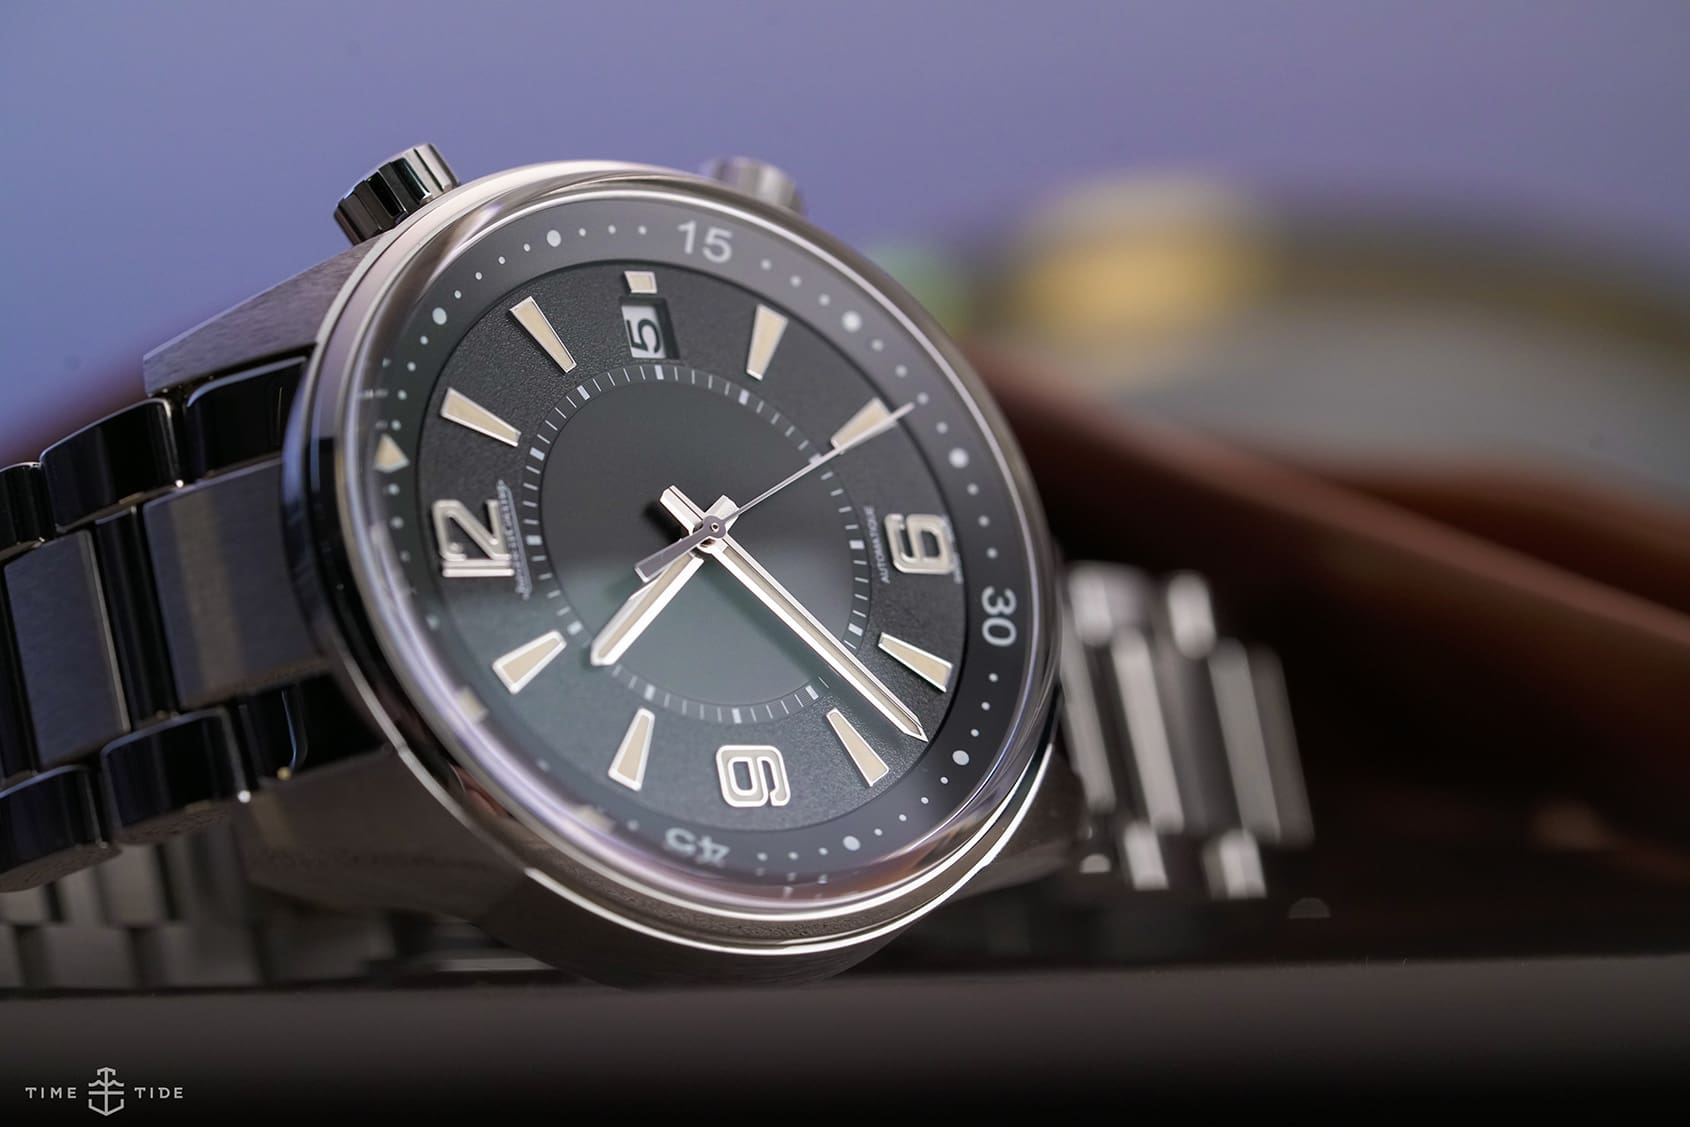 Jaeger-LeCoultre Polaris Date – The thinking man’s steel sports watch